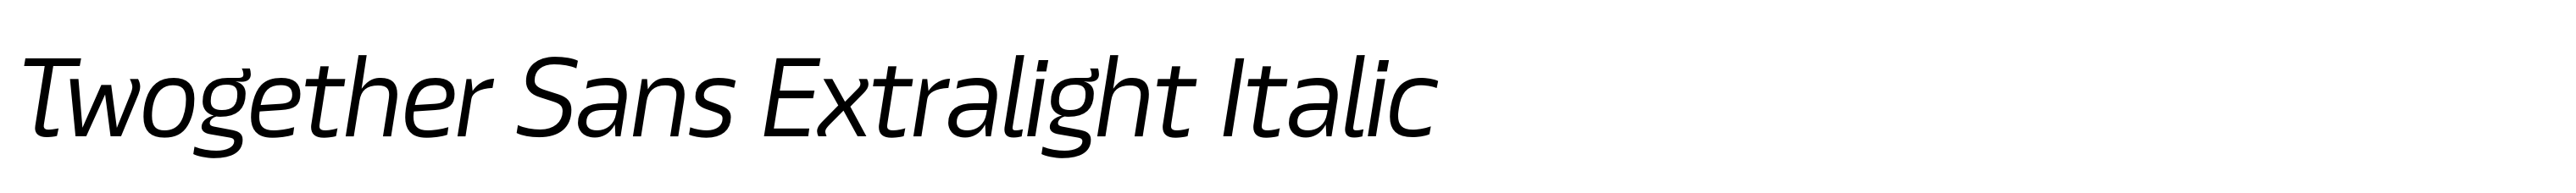 Twogether Sans Extralight Italic